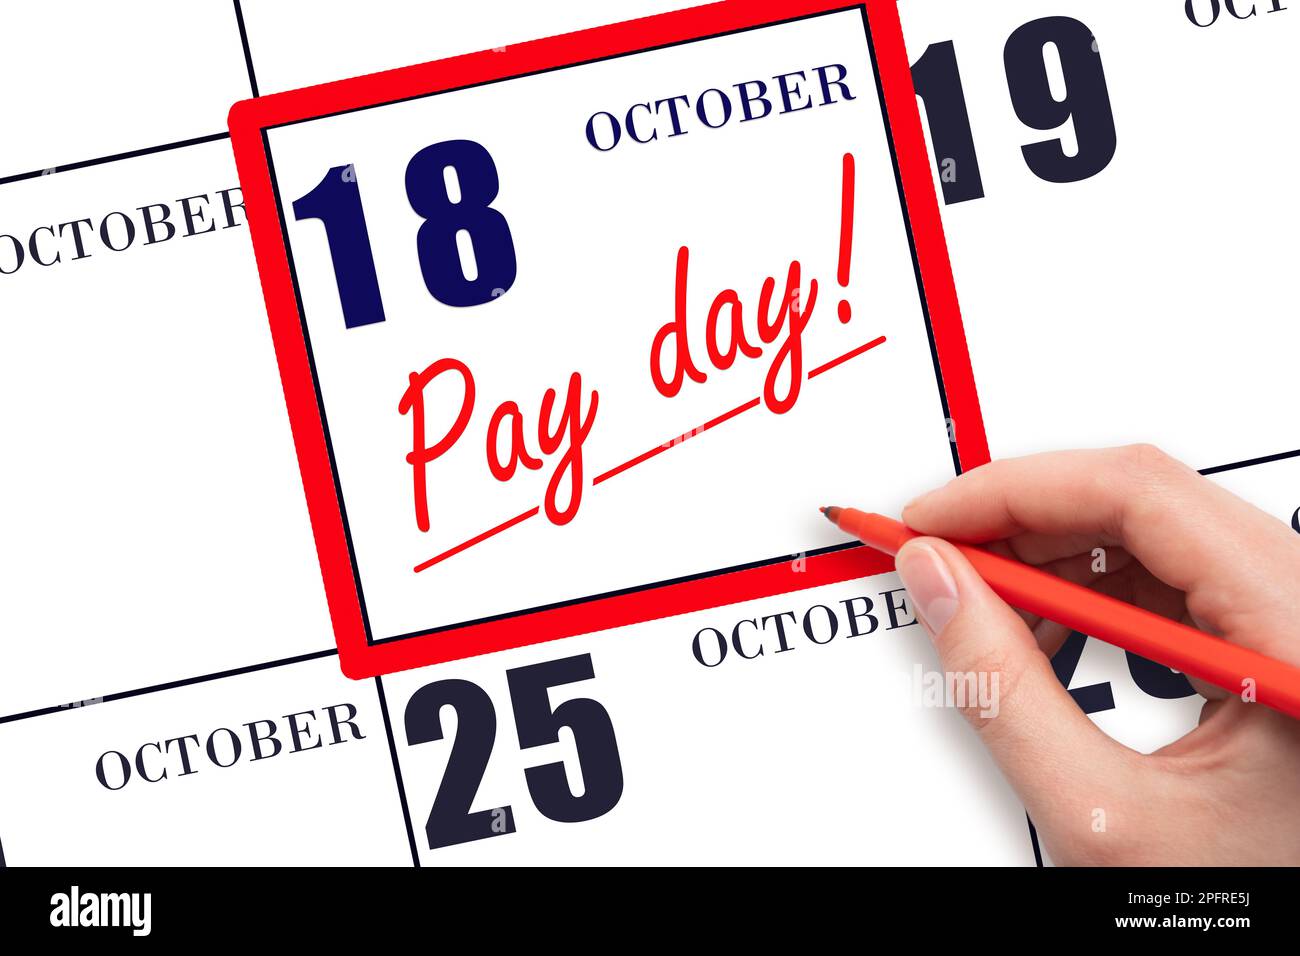 18th day of October. Hand writing text PAY DATE on calendar date October 18 and underline it. Payment due date.  Reminder concept of payment. Autumn m Stock Photo